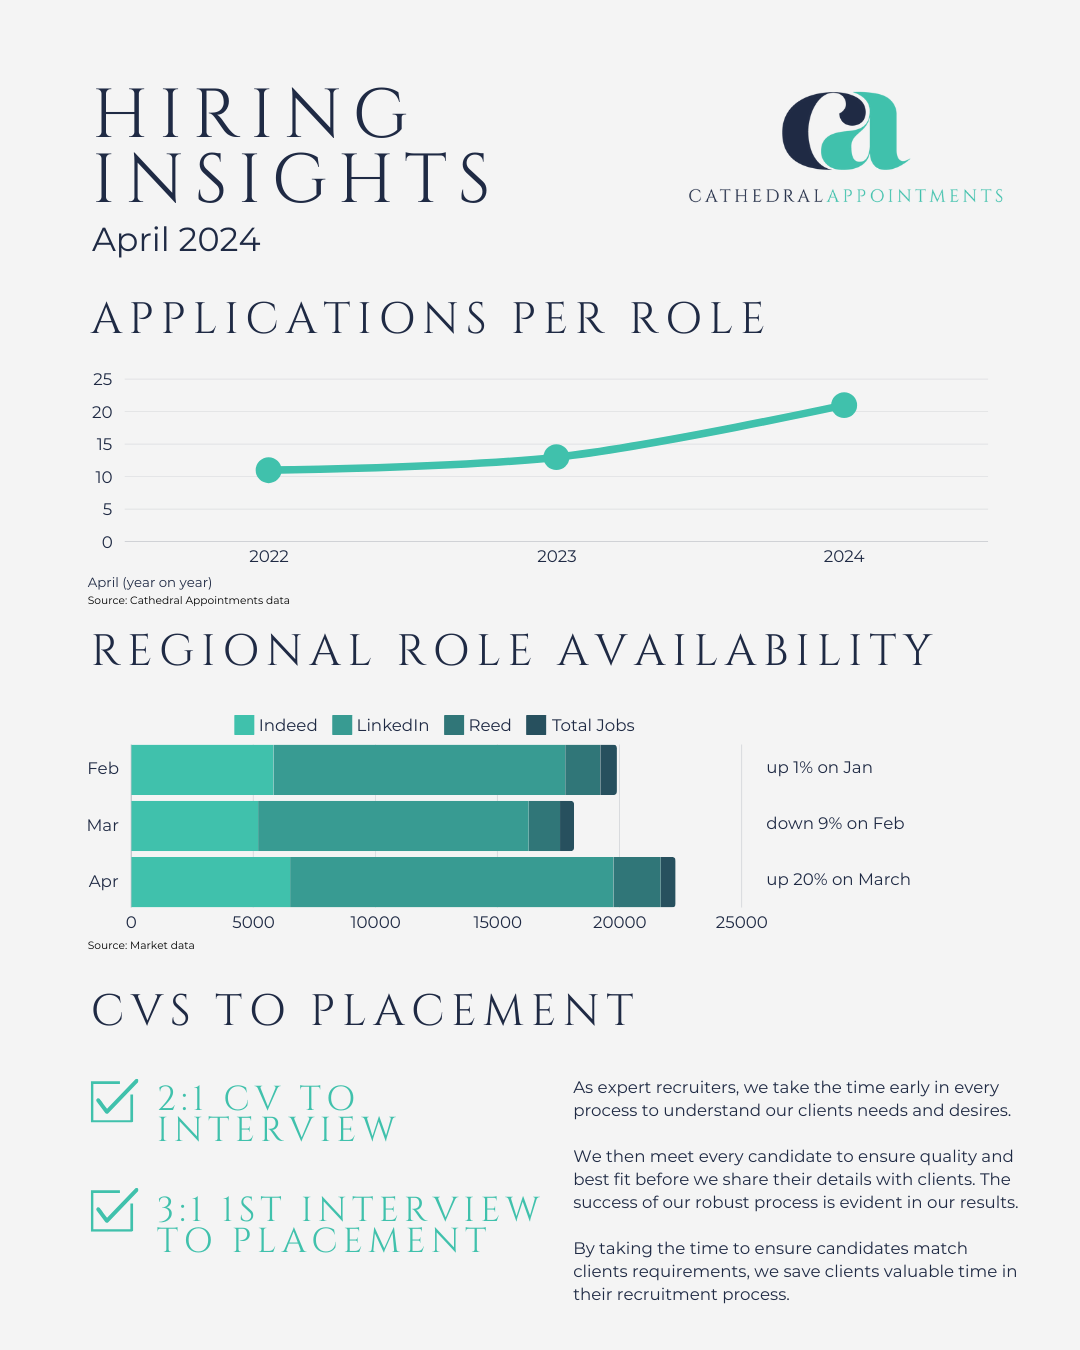 South West Hiring Insights April 2024